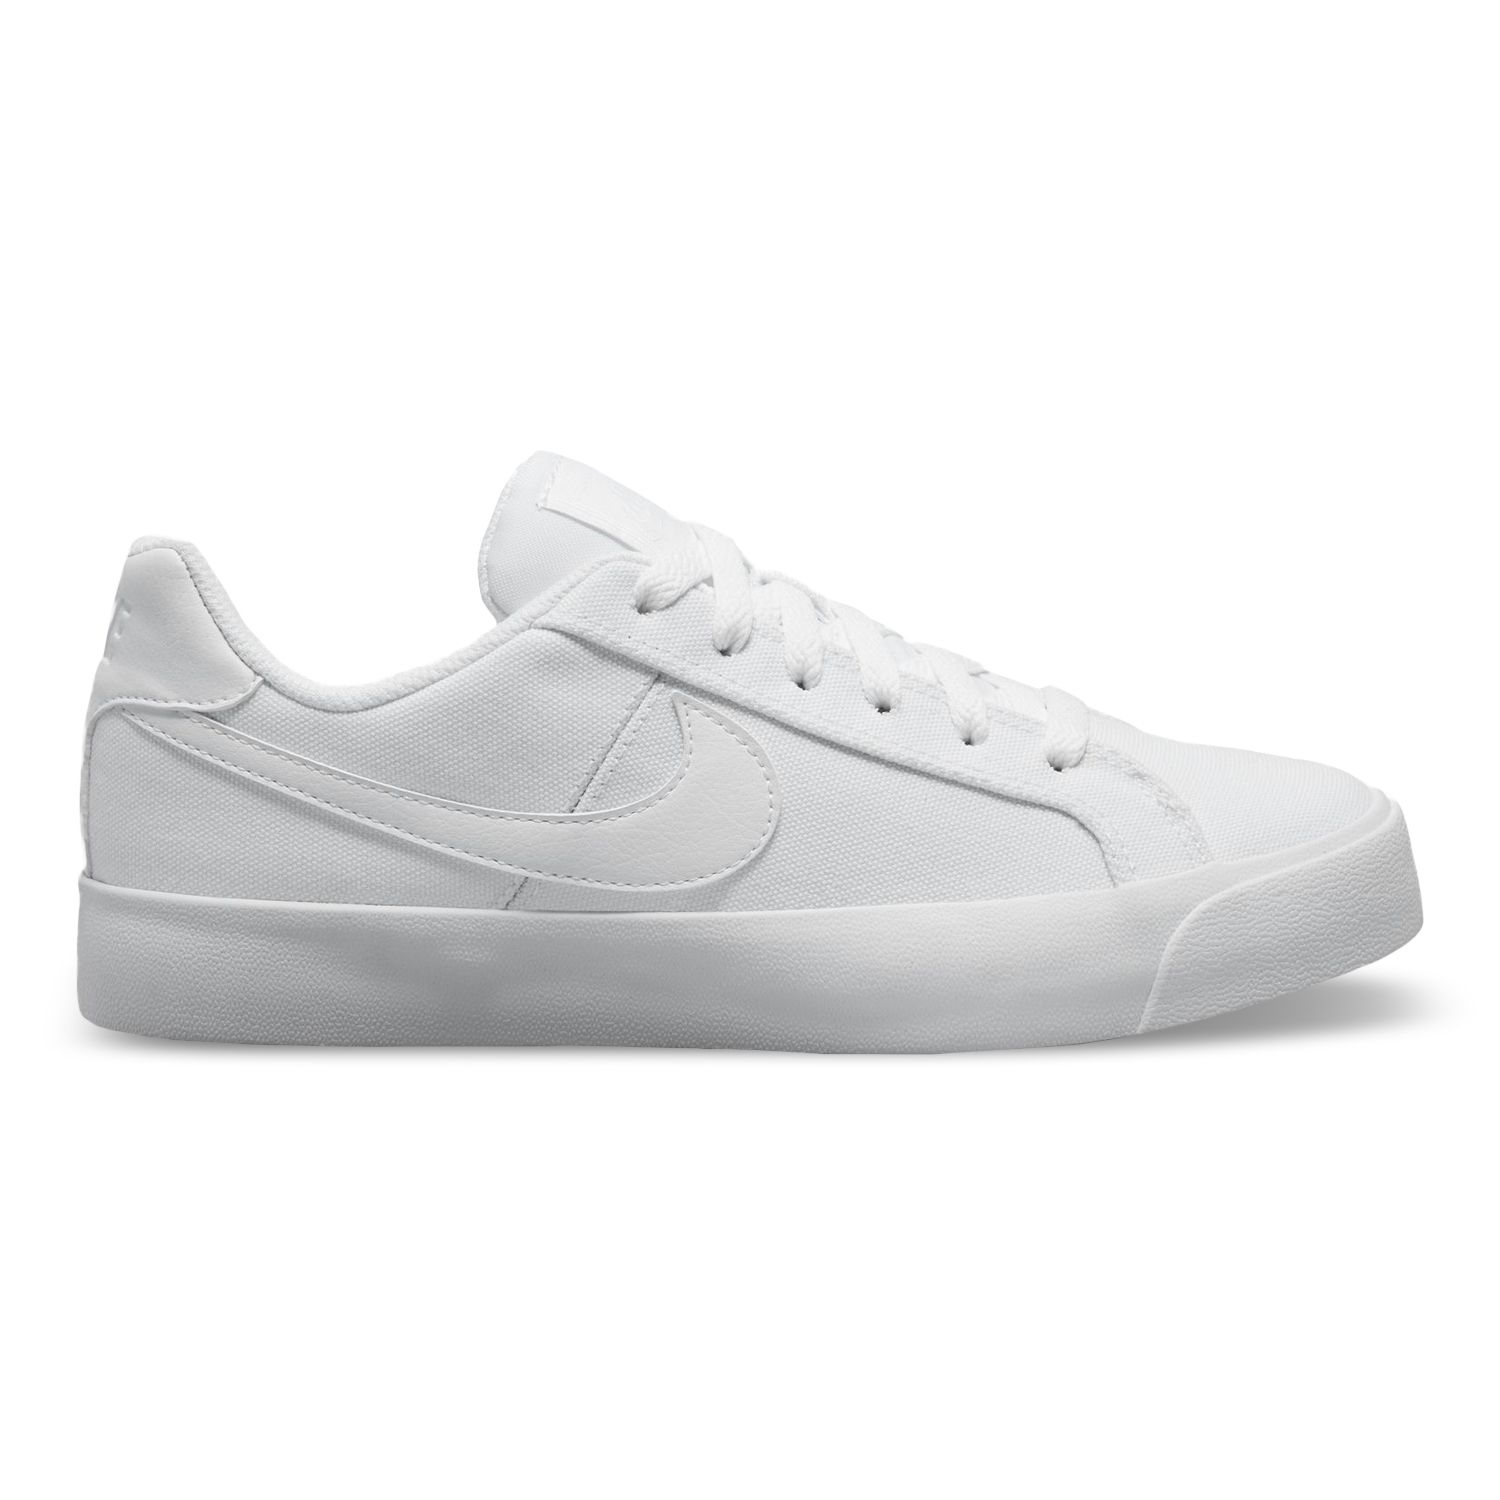 nike casual canvas shoes